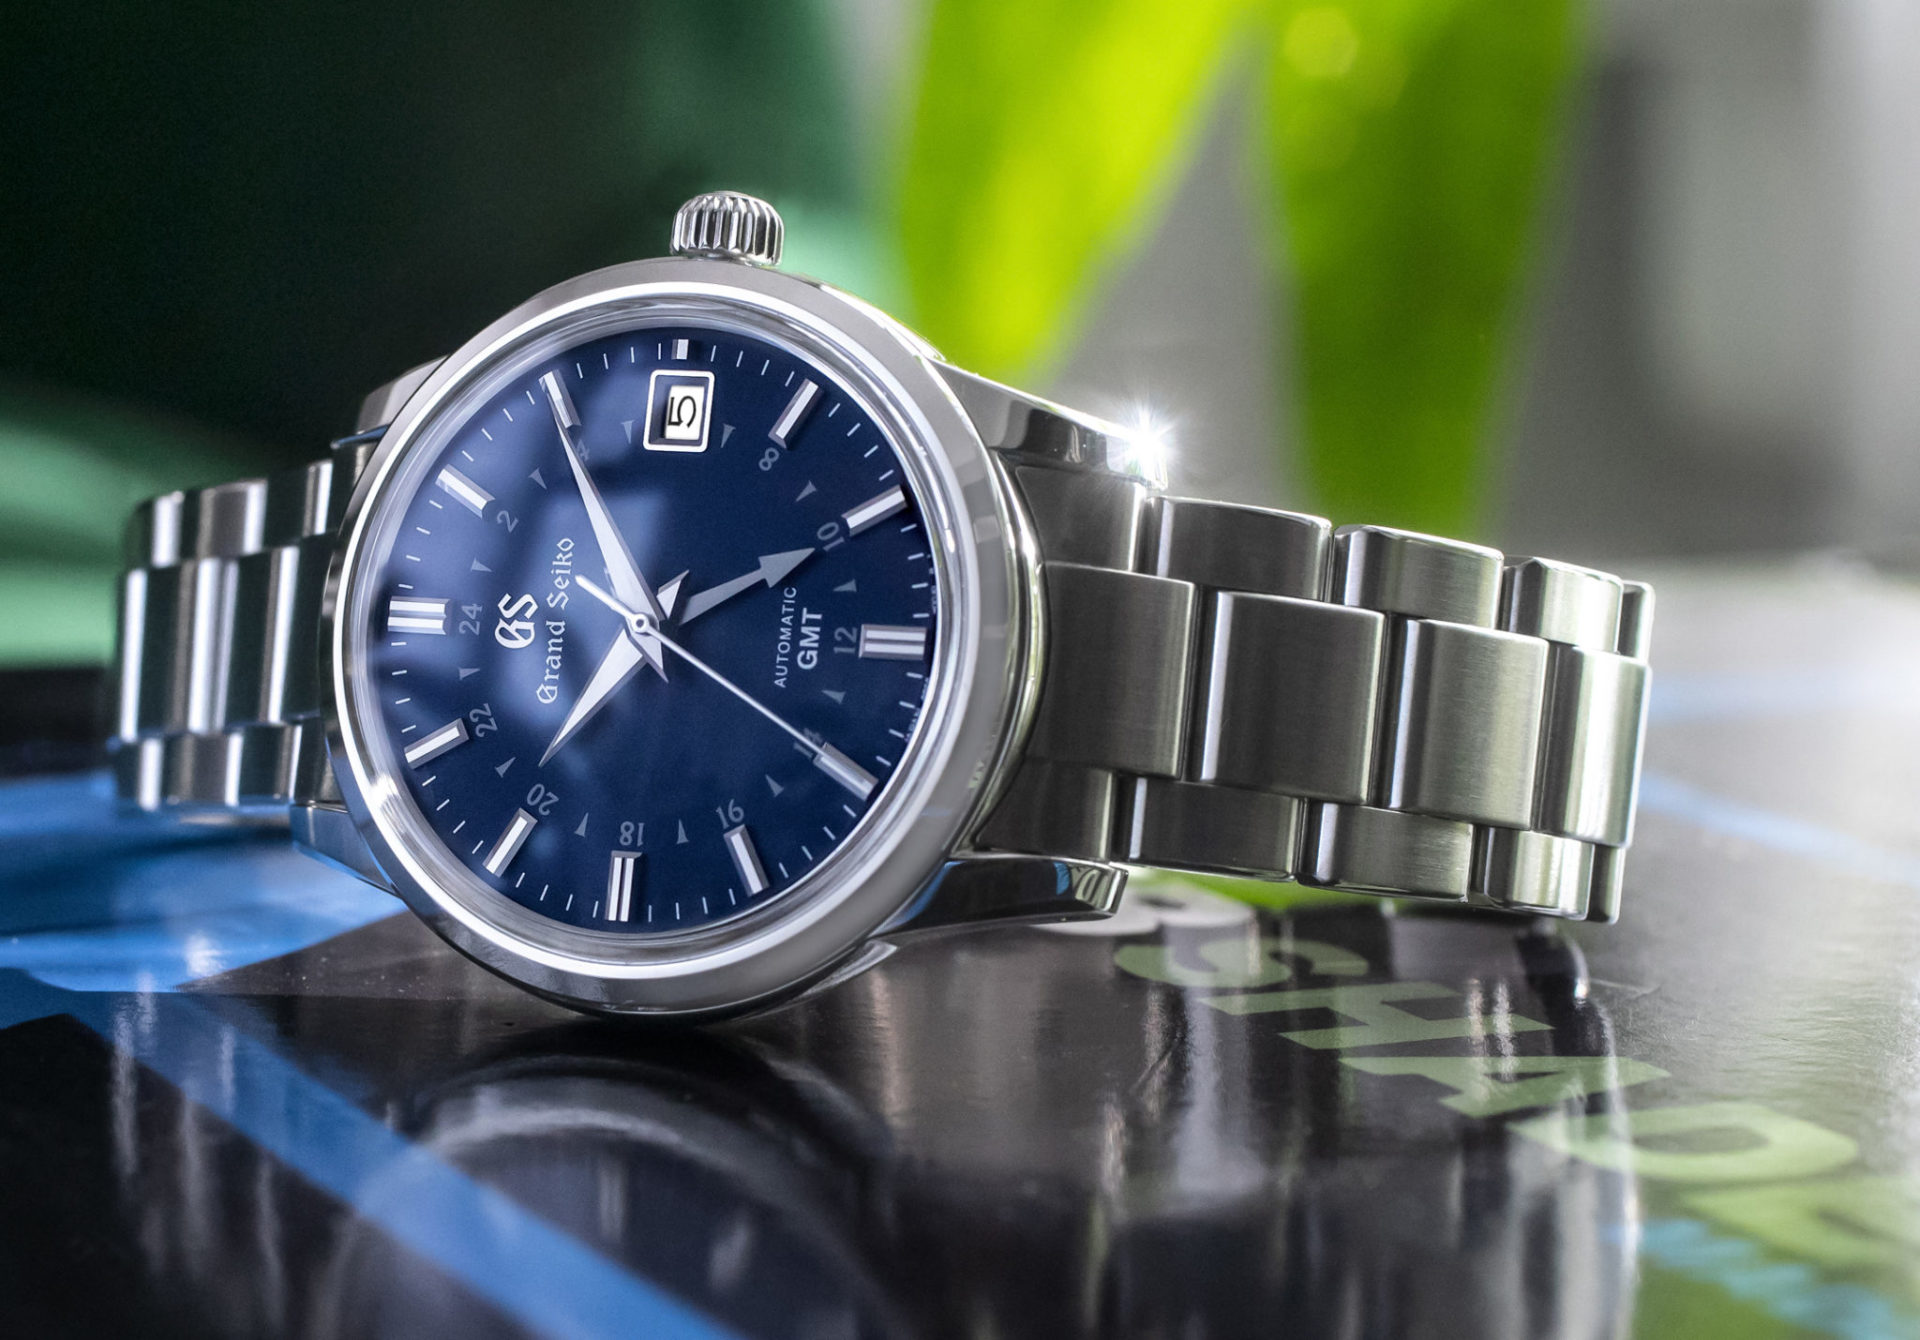 Grand Seiko And Hodinkee Finally Team Up On An Exclusive Limited Edition